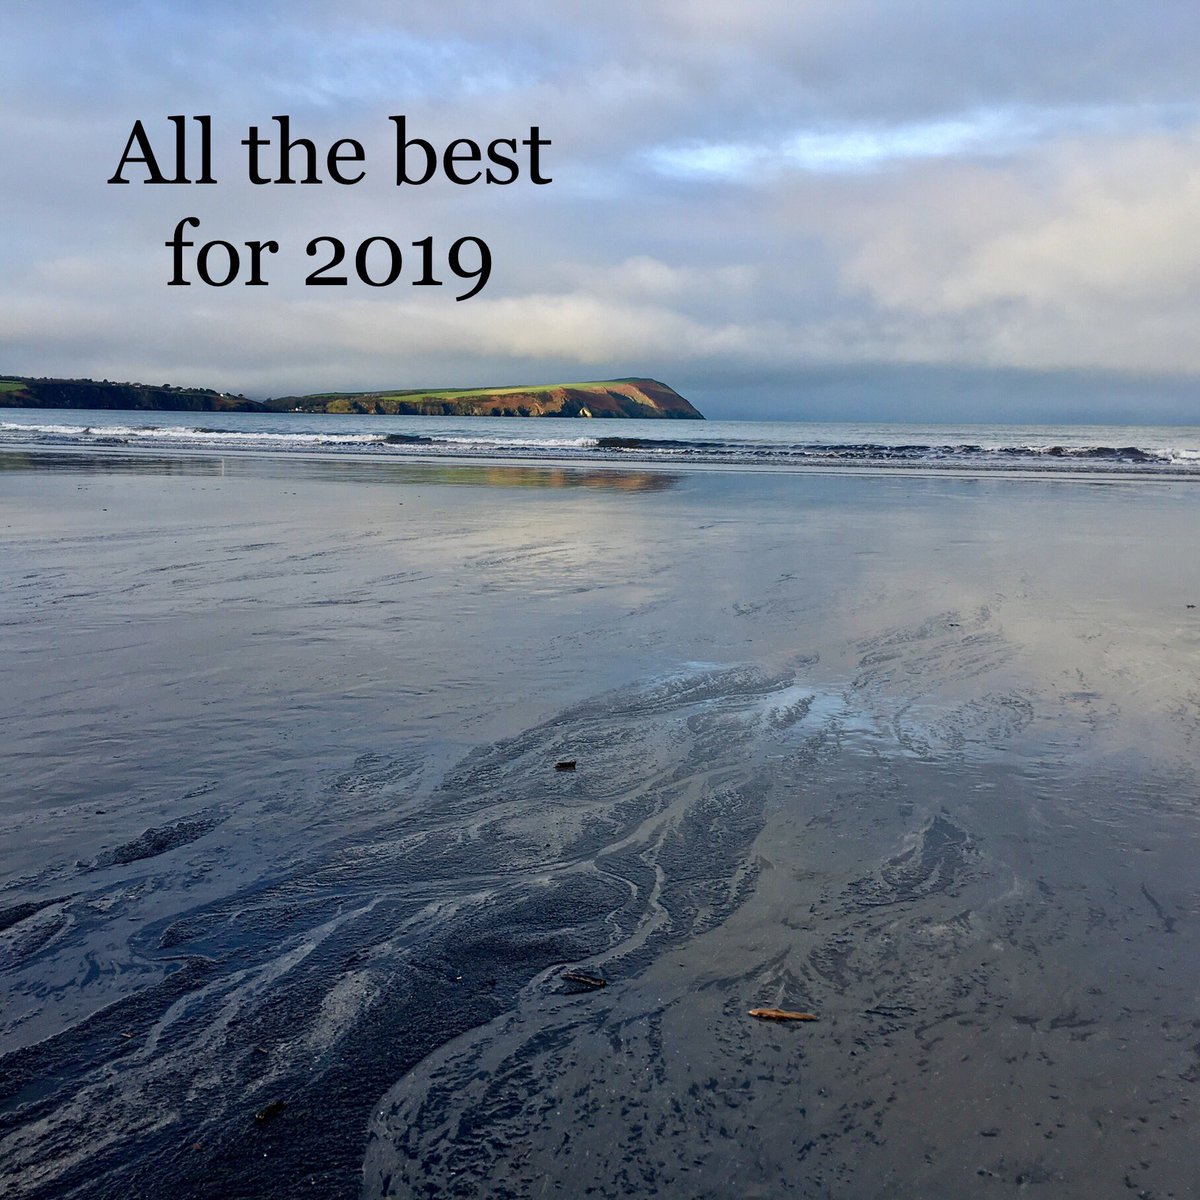 A great year of #research and #discovery in 2018 for the @ROC_CO2 team, collaborators and friends. Thank you all, & all the best for 2019!